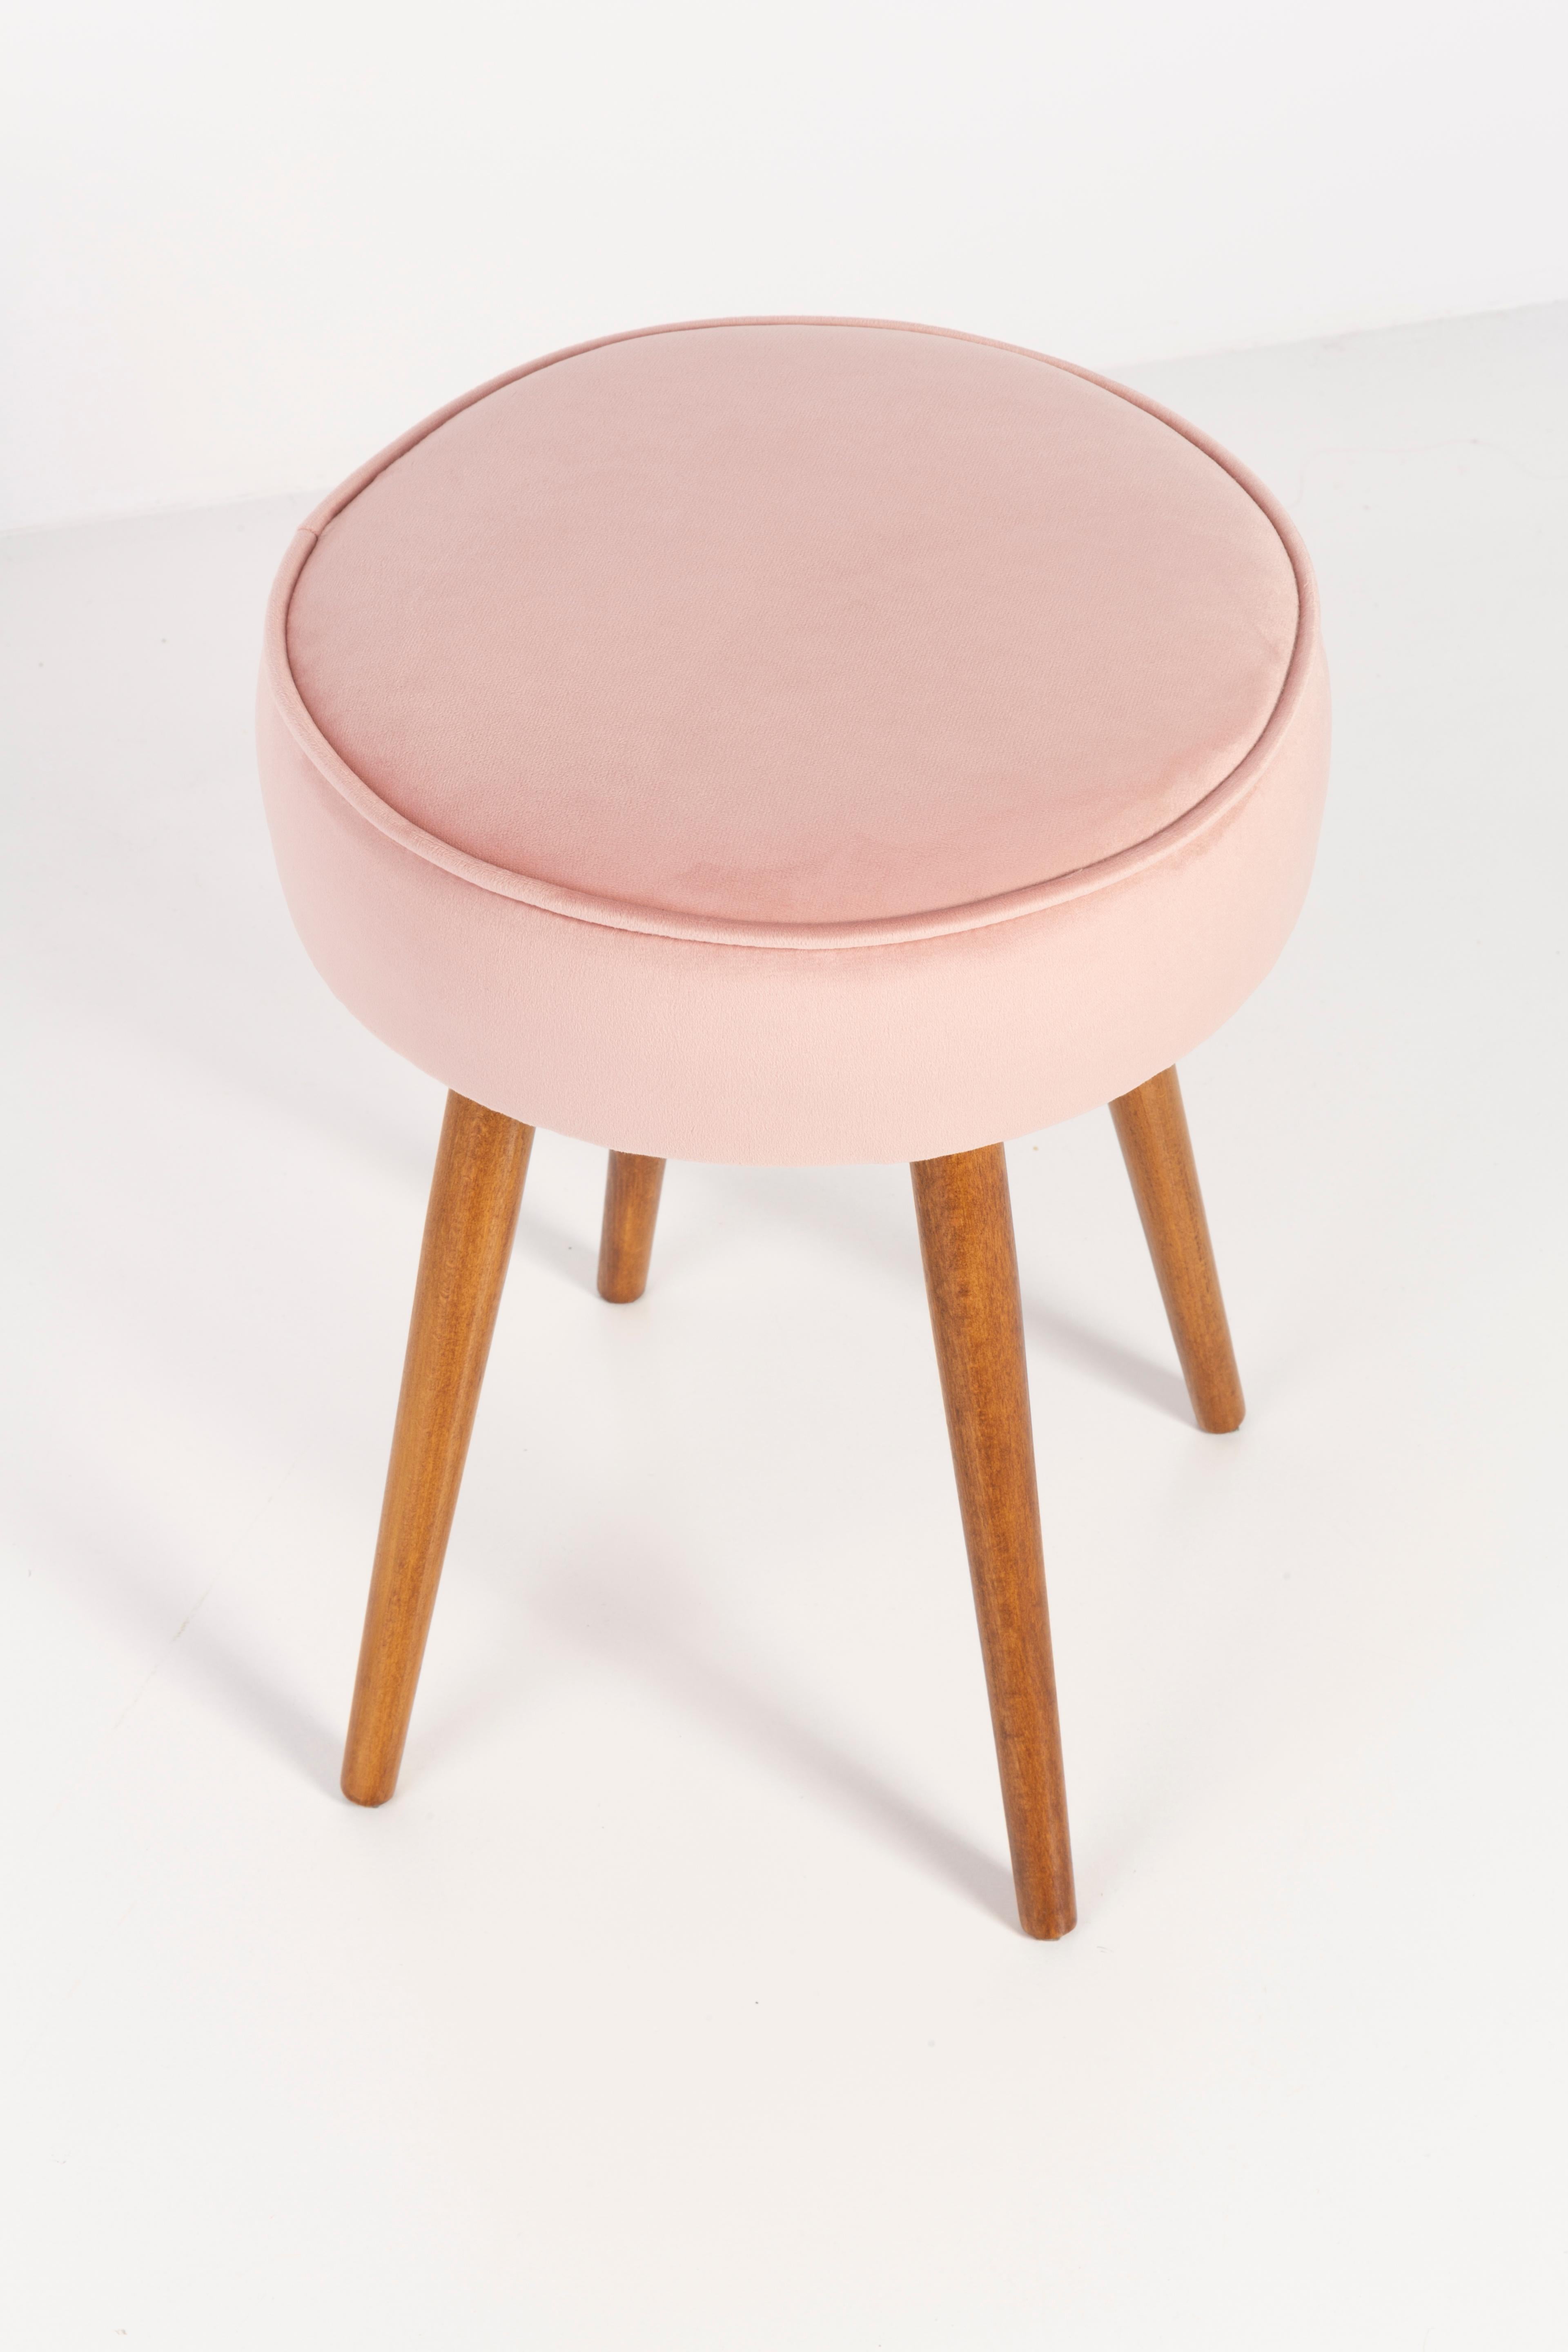 Stool from the turn of the 1960s and 1970s. Beautiful baby pink upholstery. The stool consists of an upholstered part, a seat and wooden legs narrowing downwards, characteristic of the 1960s style. We can prepare this pair also in another color of